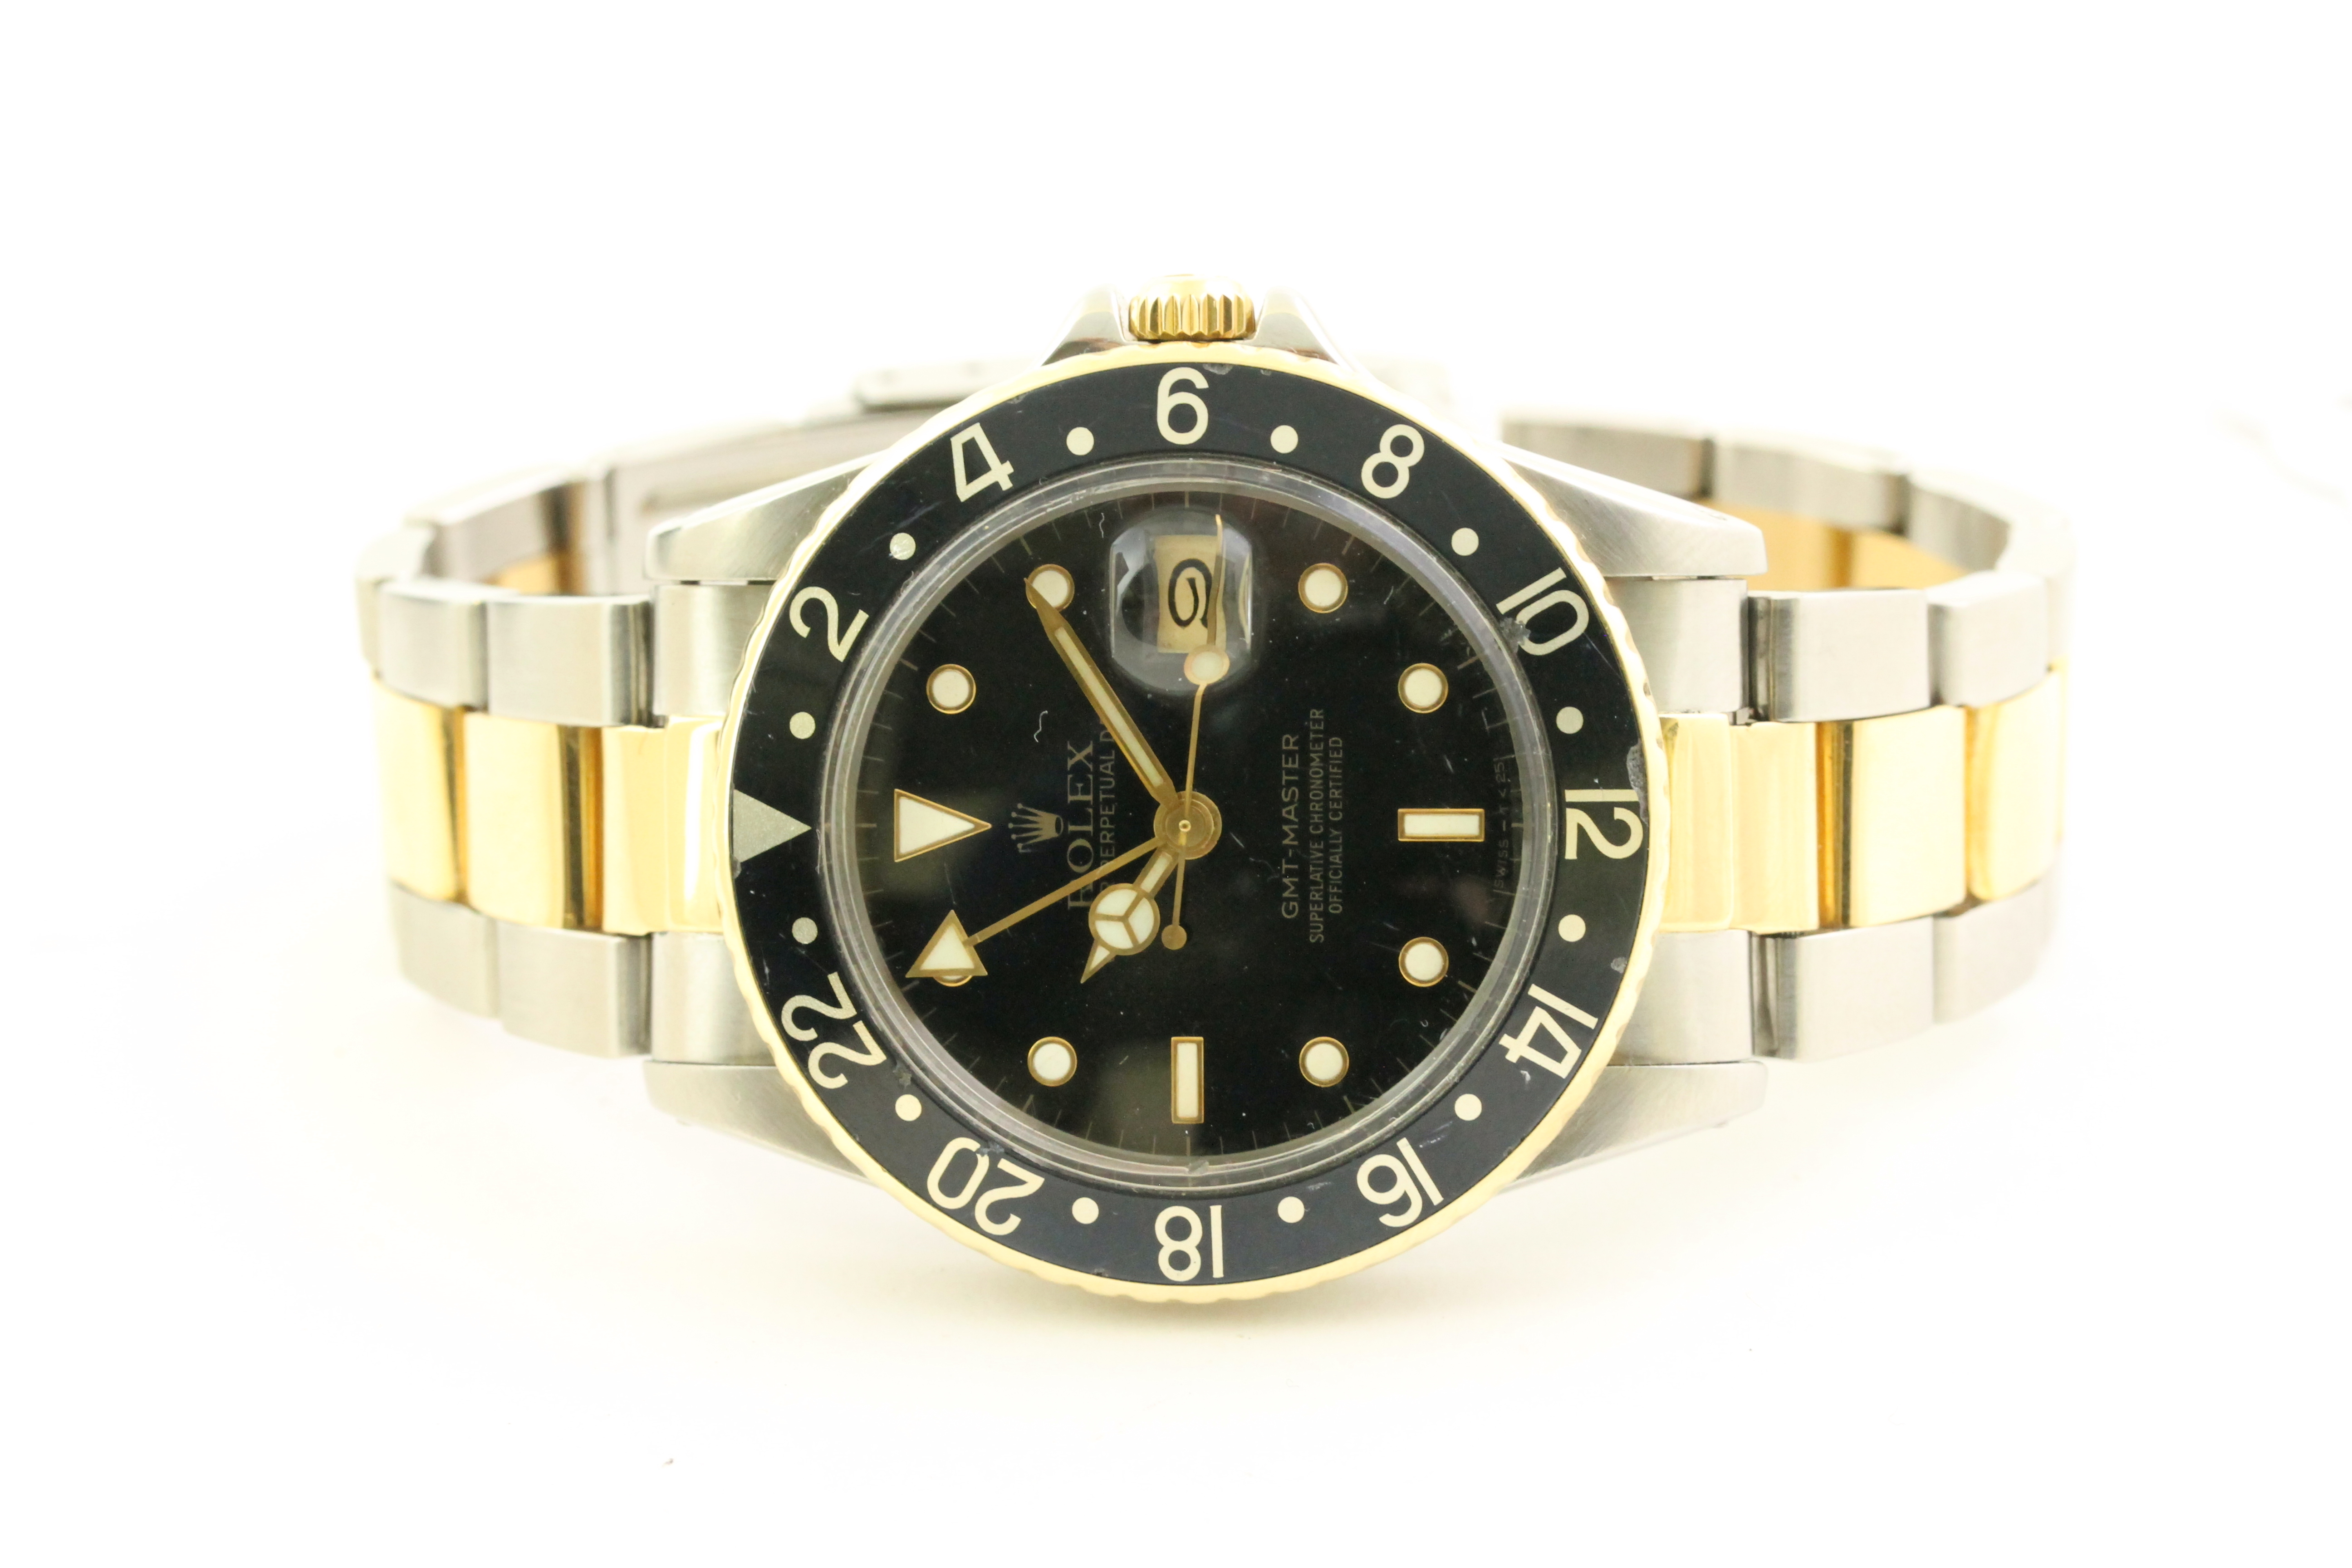 VINTAGE ROLEX GMT MASTER 16753 STEEL AND GOLD CIRCA 1982 - Image 3 of 5